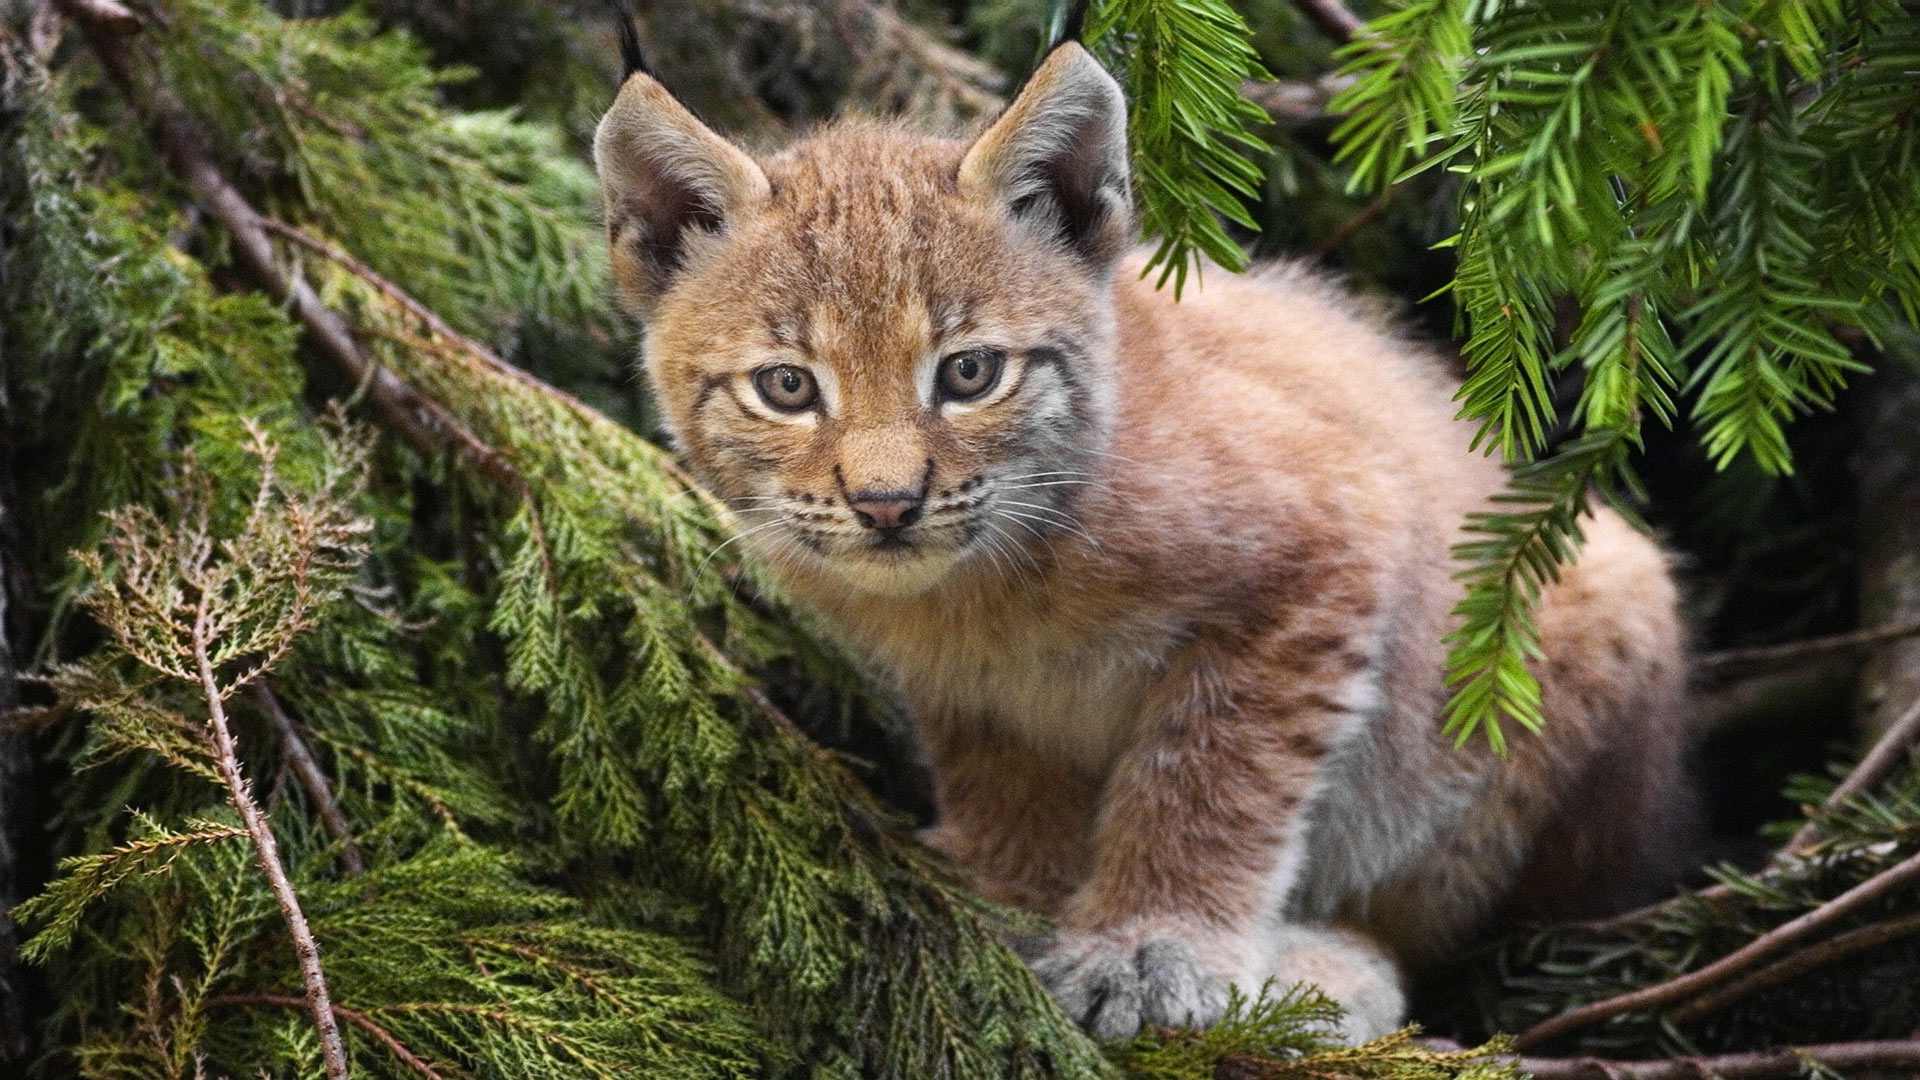 Free photo A picture of a bobcat kitten in pine branches